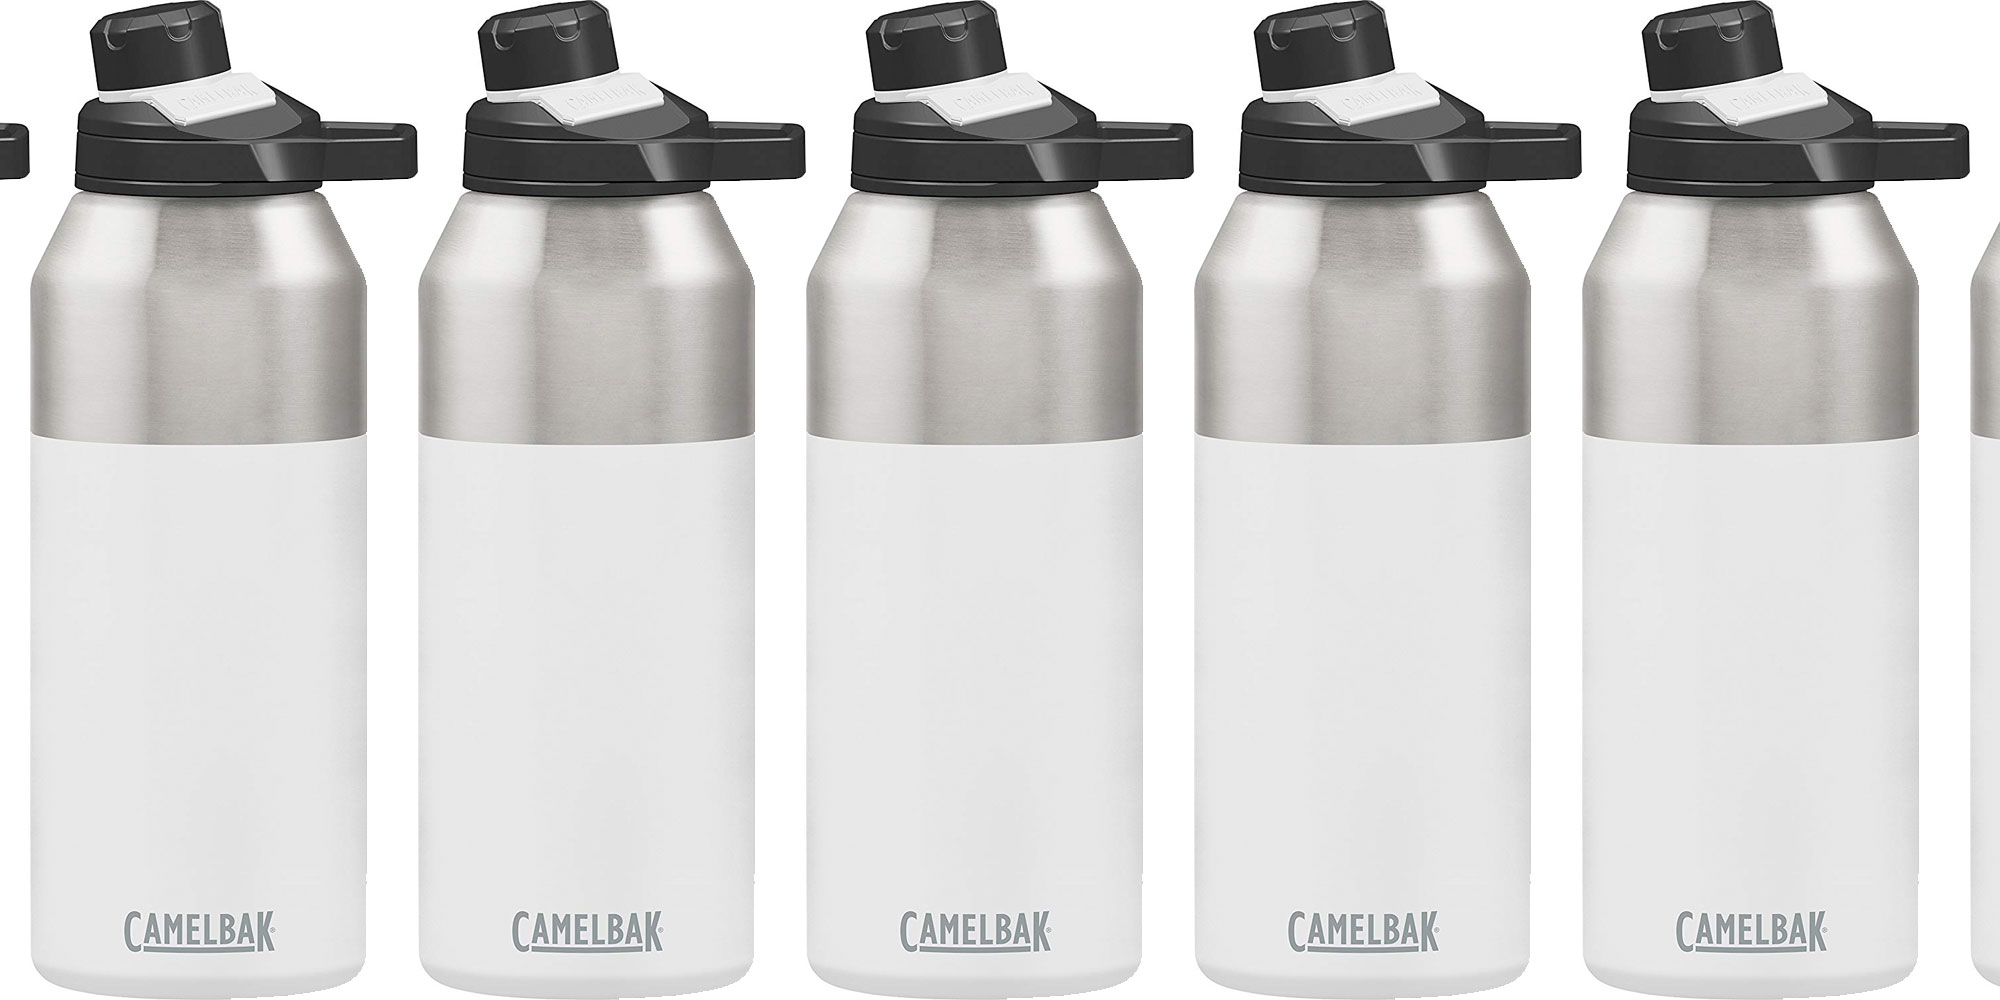 https://9to5toys.com/wp-content/uploads/sites/5/2019/04/CamelBak-Chute-Mag-Stainless-Steel-Water-Bottle.jpg